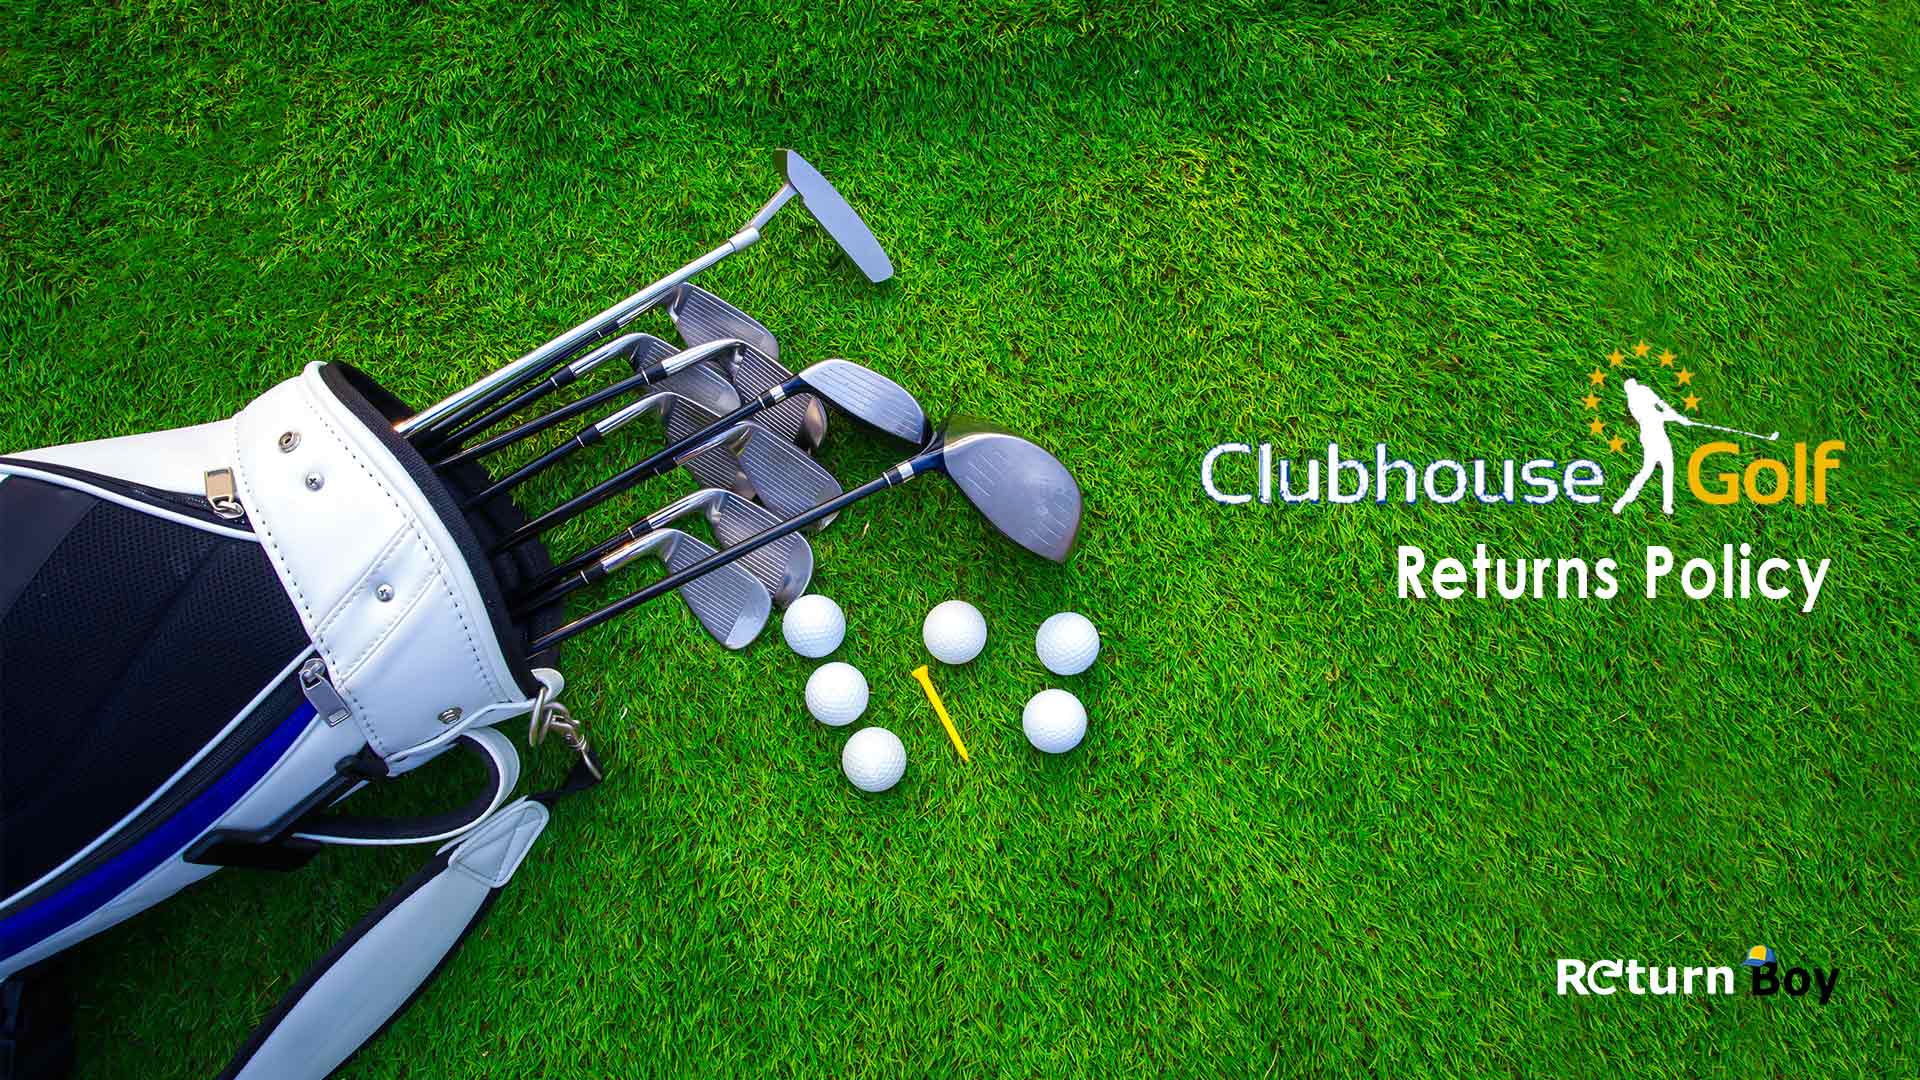 Clubhouse Golf Returns Policy